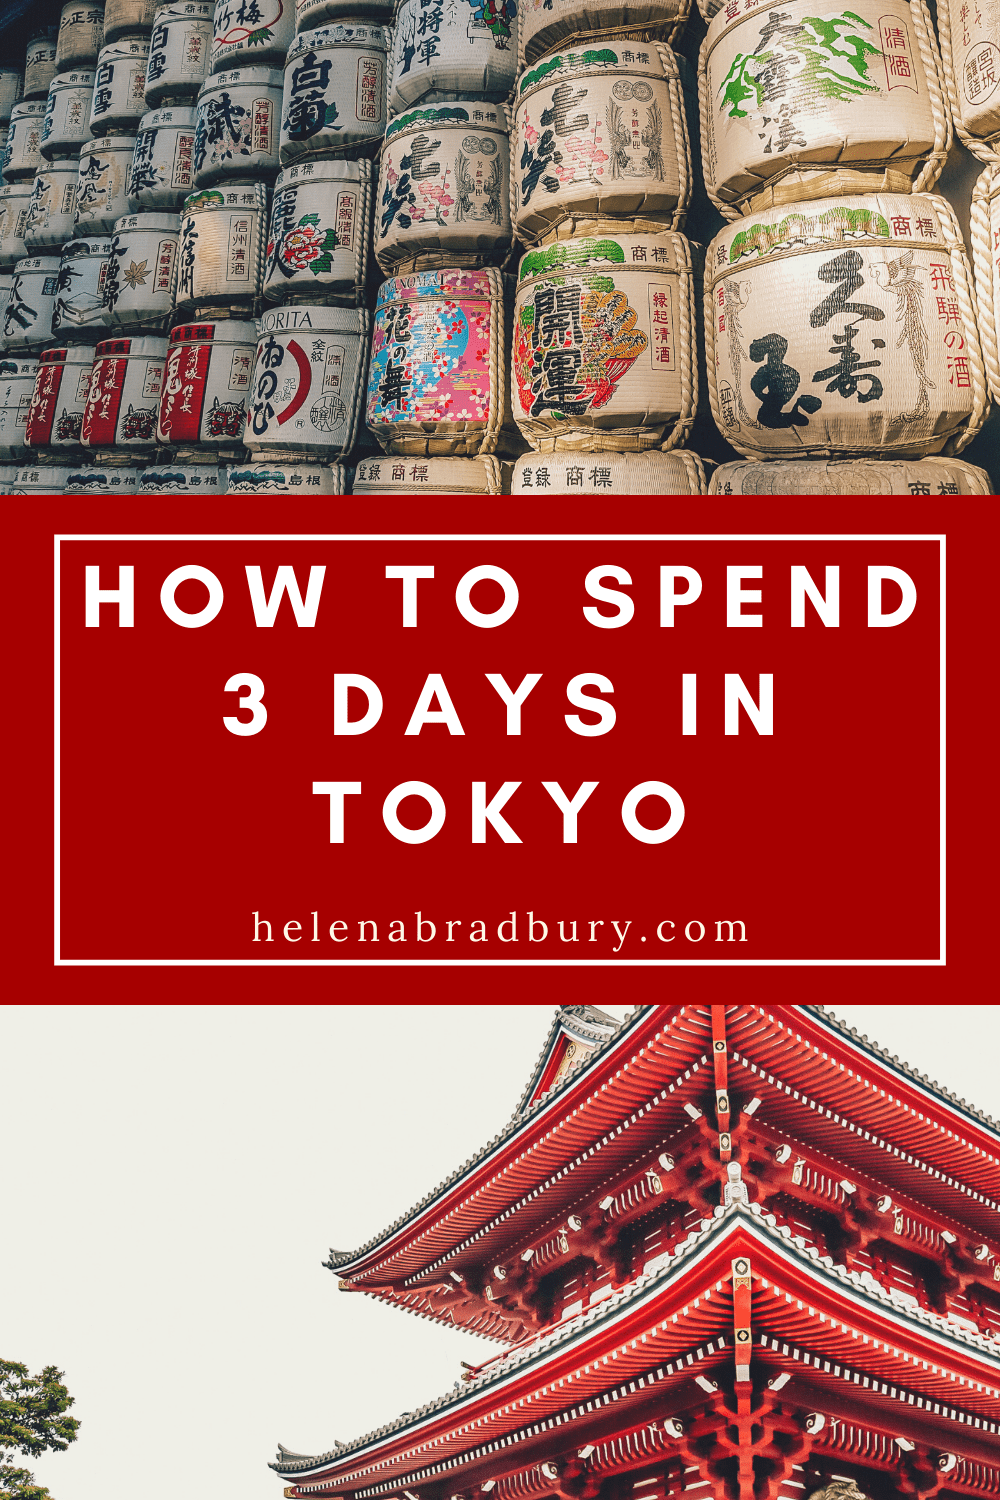 The best 3 day Tokyo itinerary | Helena Bradbury travel blogger | 3 days in Tokyo | 48 hours in Tokyo | weekend in Tokyo what to do | Tokyo travel tips | tokyo travel blog | tokyo japan travel guide | tokyo japan travel tips | where to do in t…